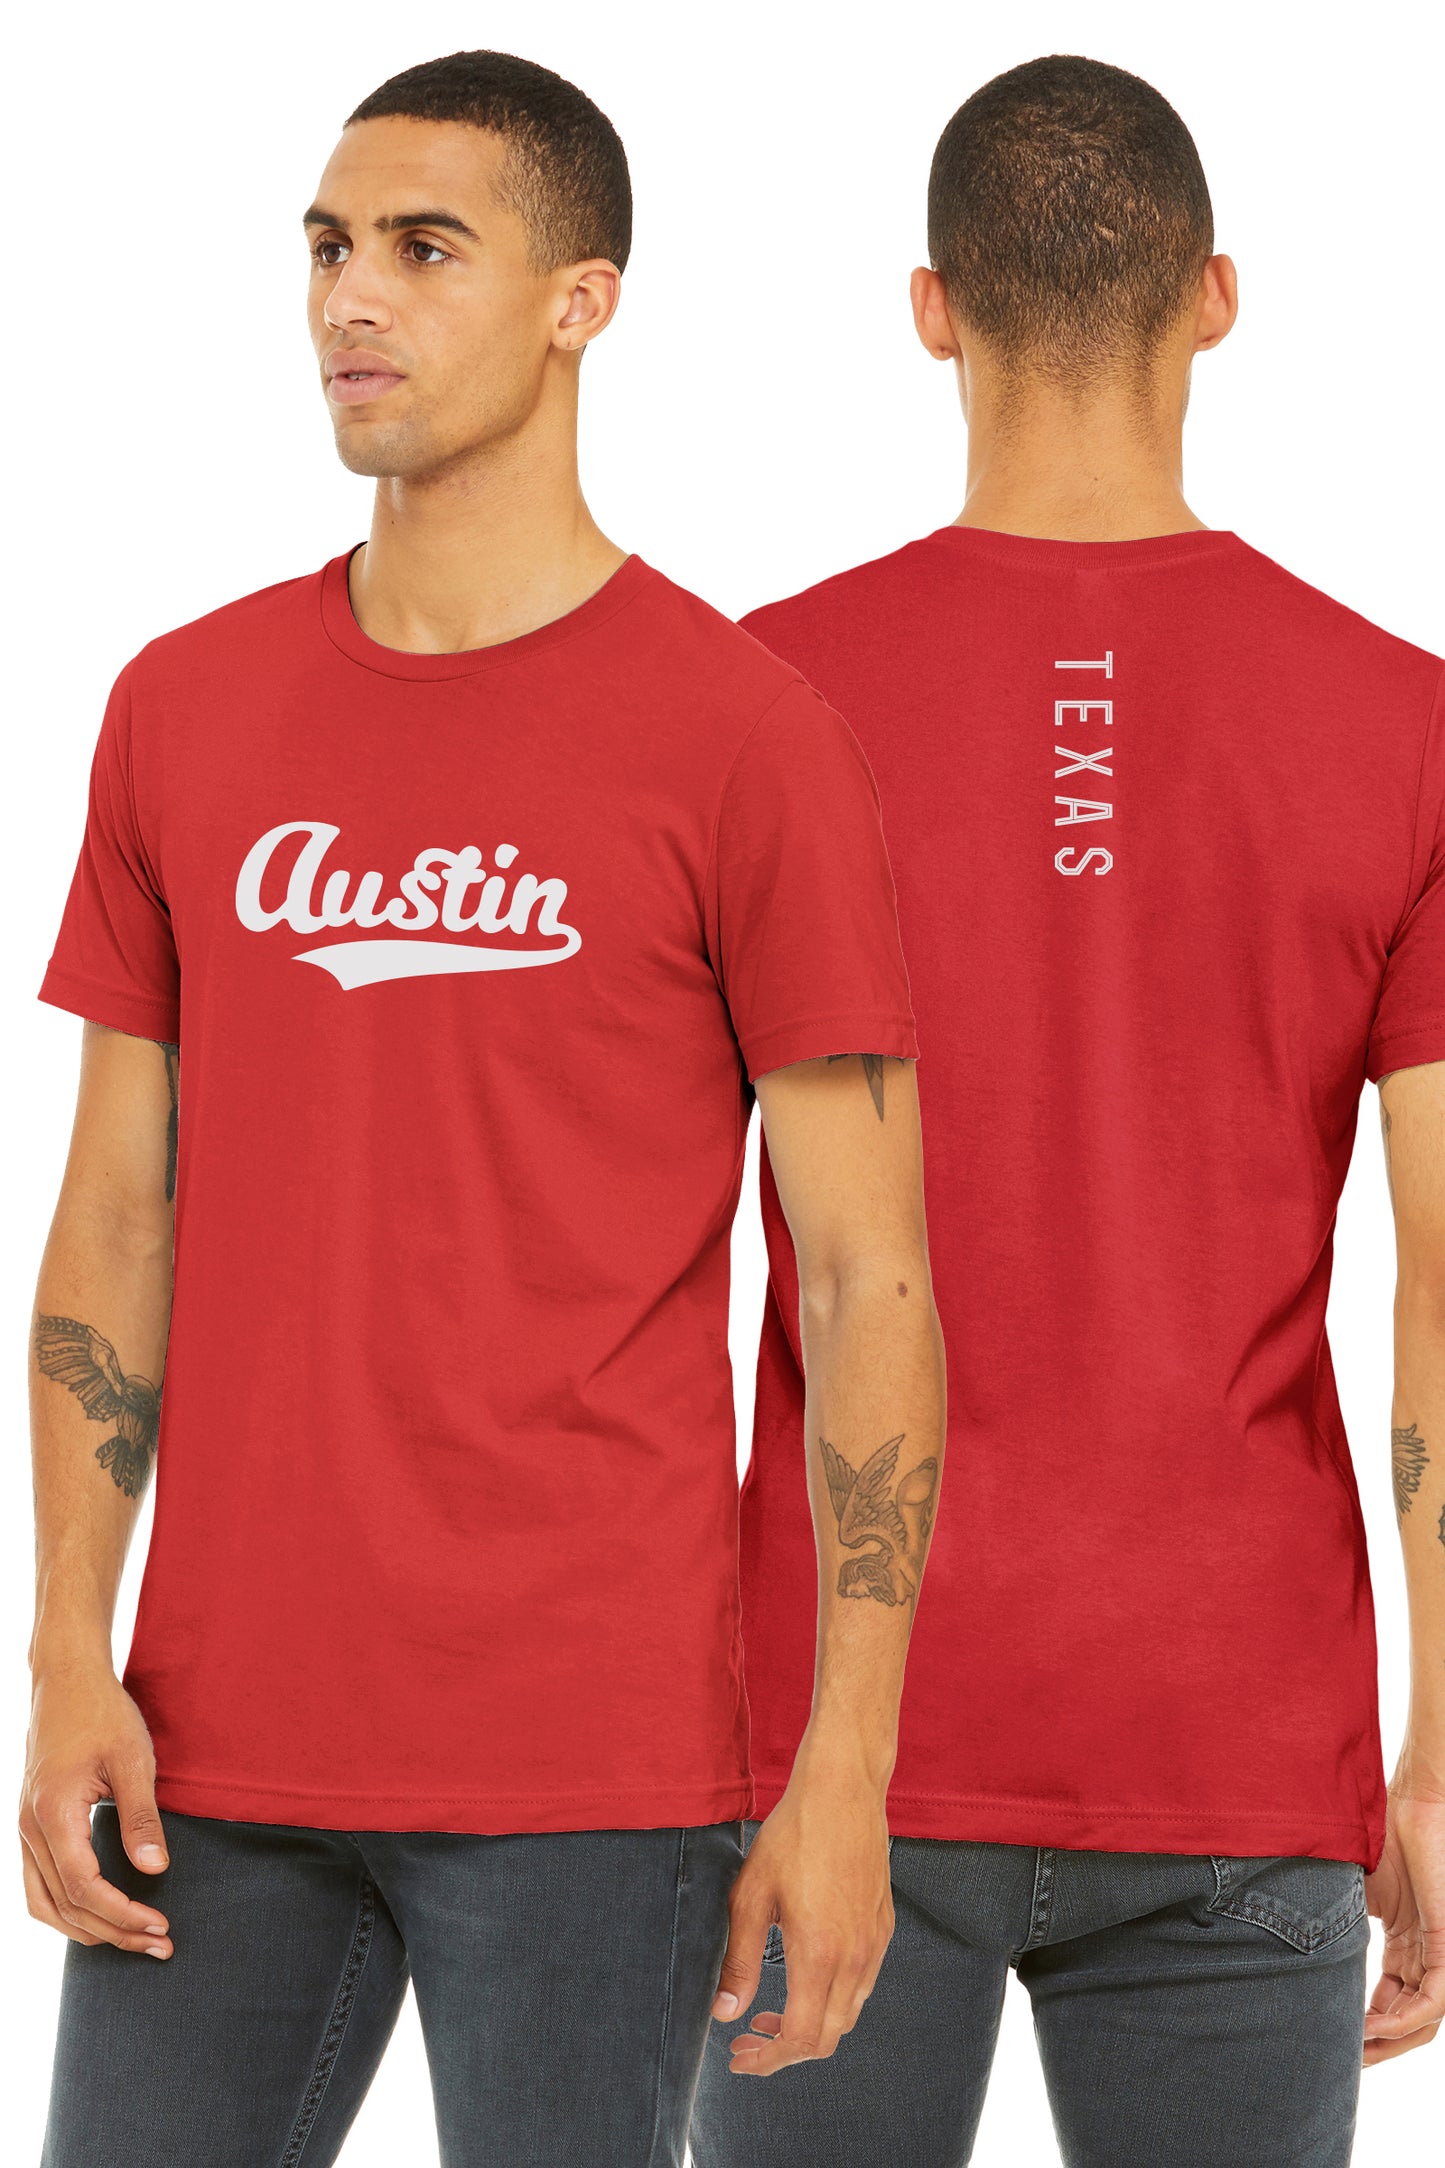 Daxton Adult Unisex Tshirt Austin Script with Texas Vertical on the Back